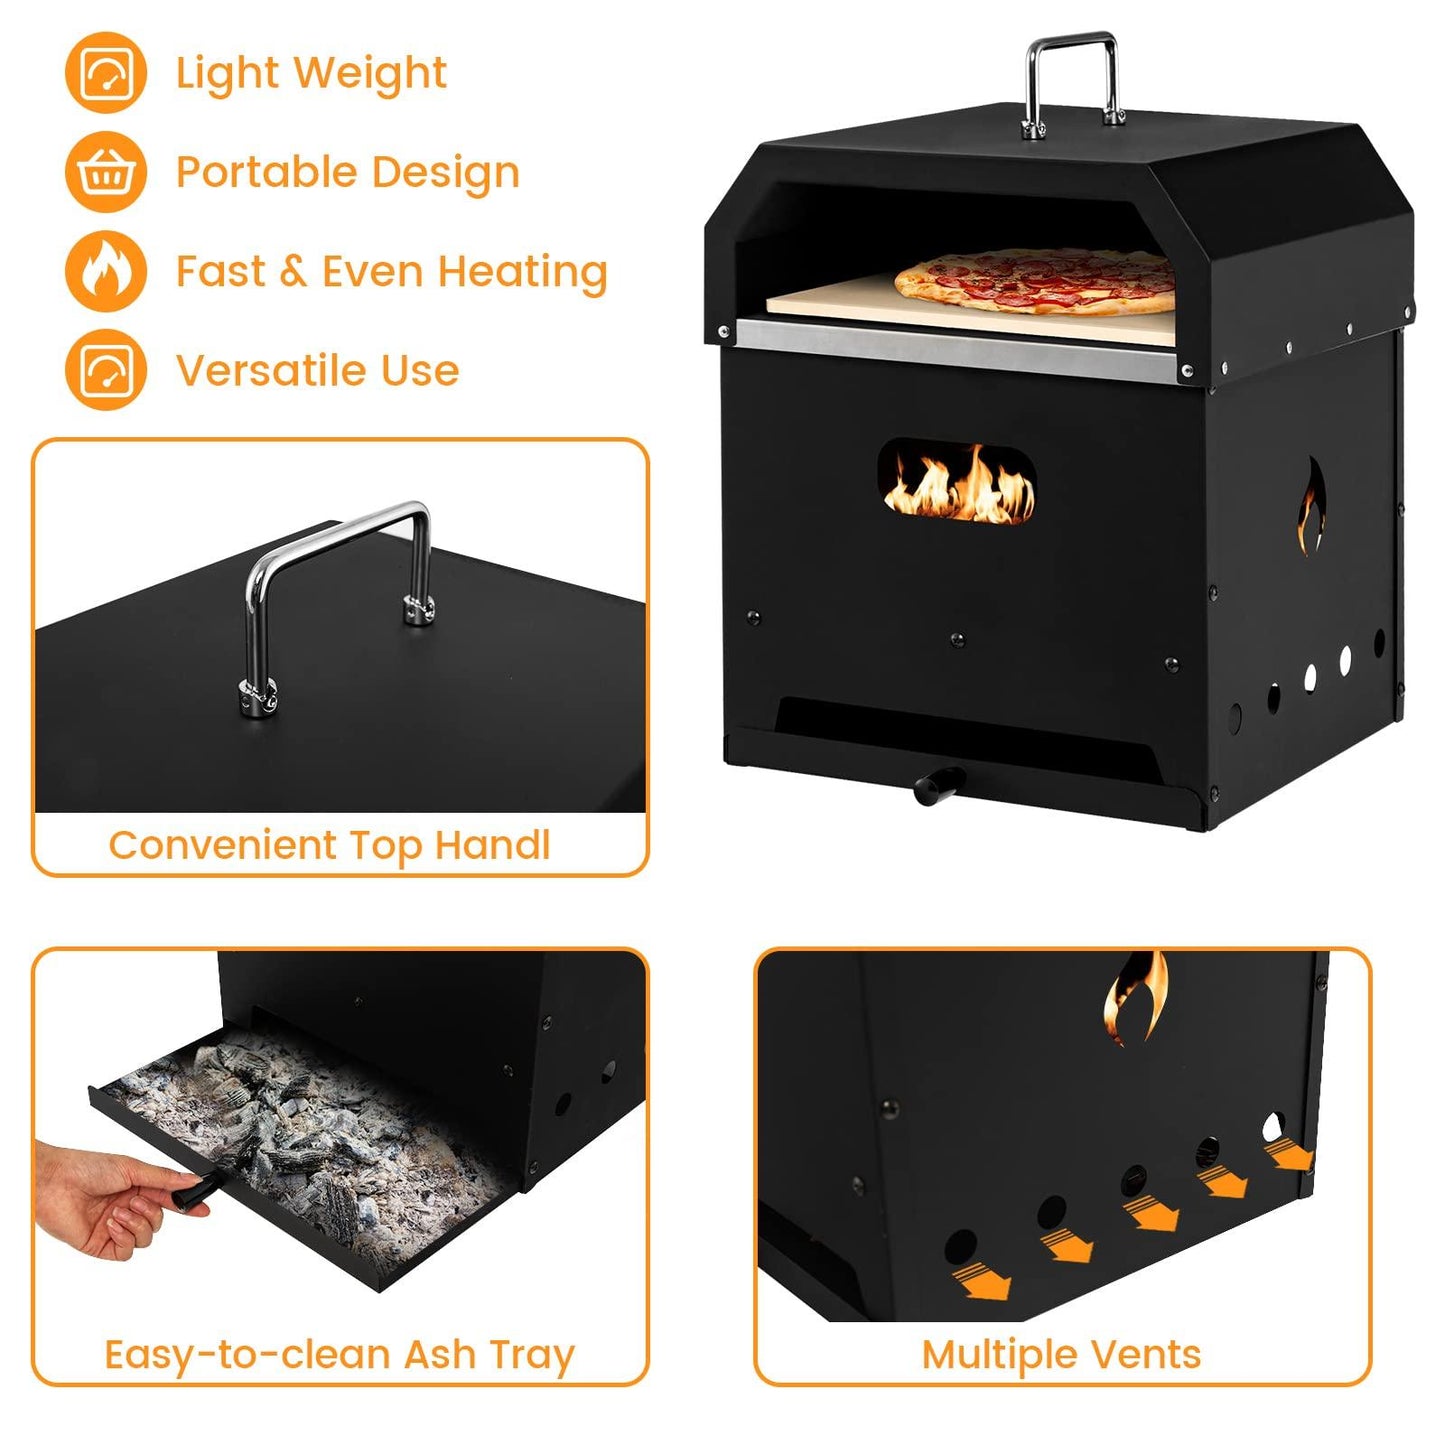 Giantex 4-in-1 Outdoor Pizza Oven, Wood Fired 2-Layer Pizza Maker with Cover, Pizza Stone, Shovel, Grill Grid, Detachable Grill Oven Fire Pit Pizza Ovens for Outside Backyard BBQ - CookCave